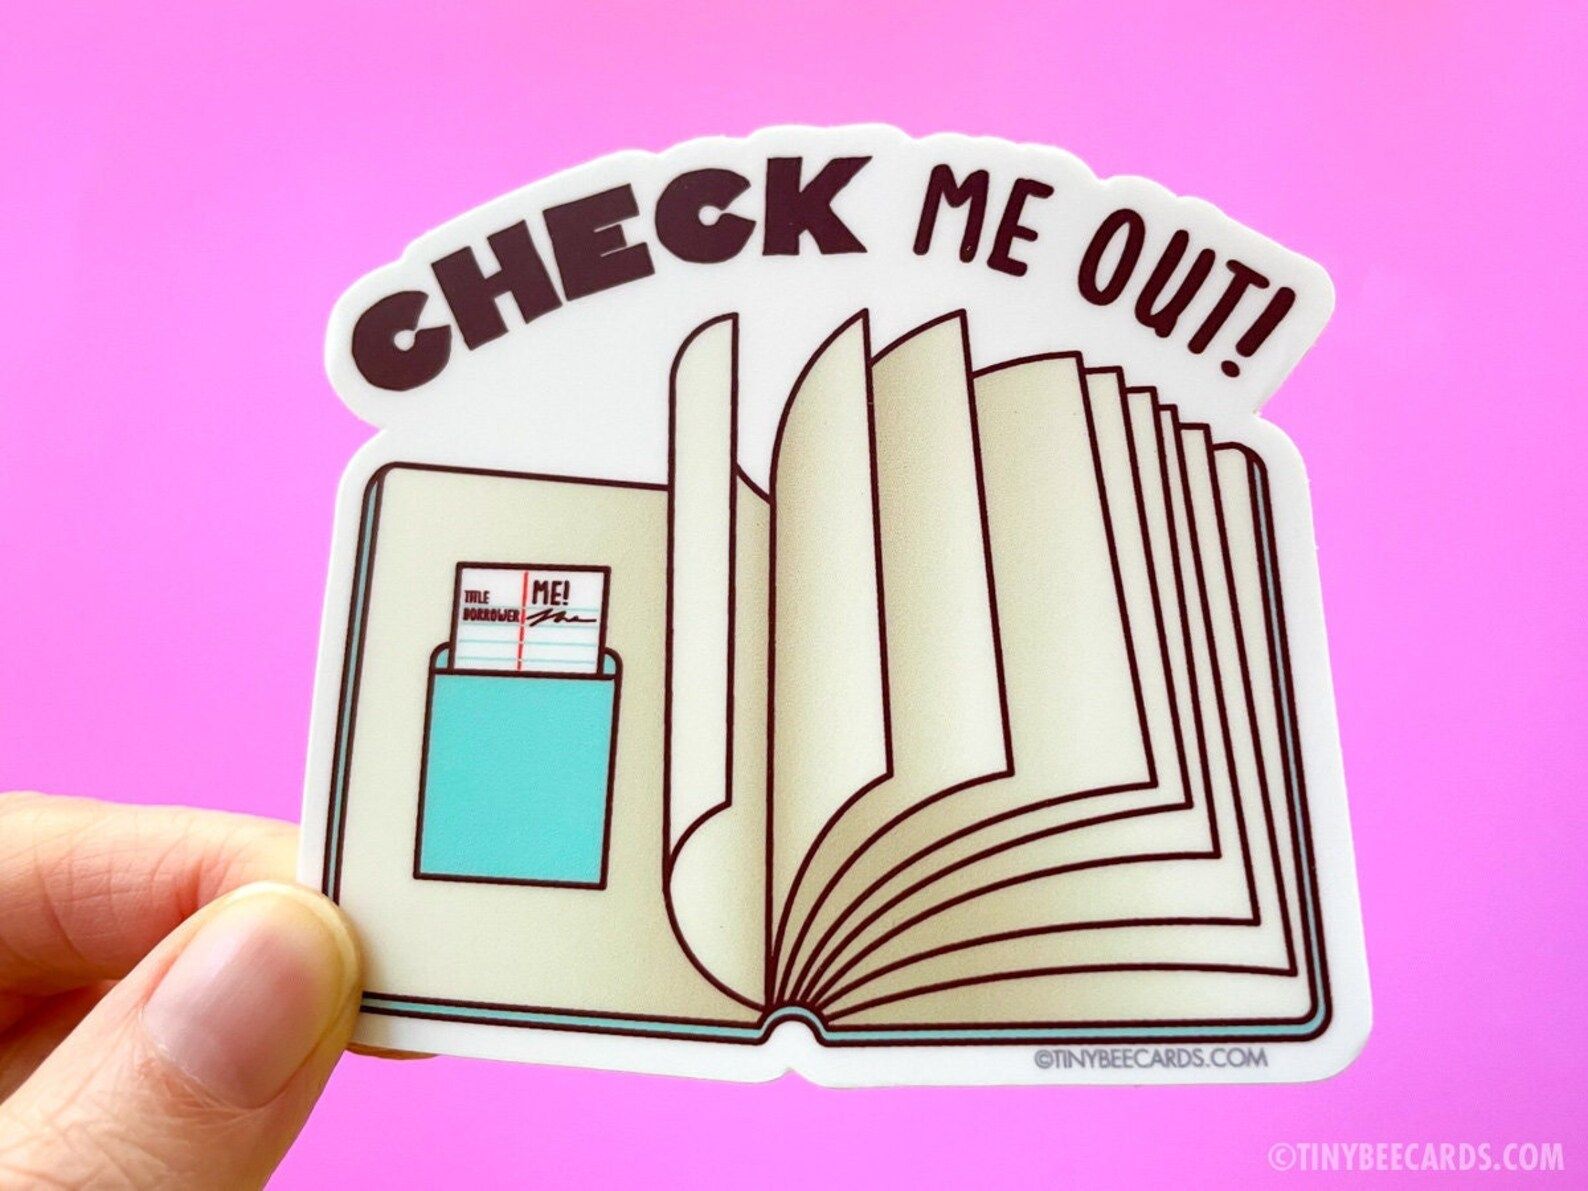 image of a book sticker with a due date card and the words "check me out."